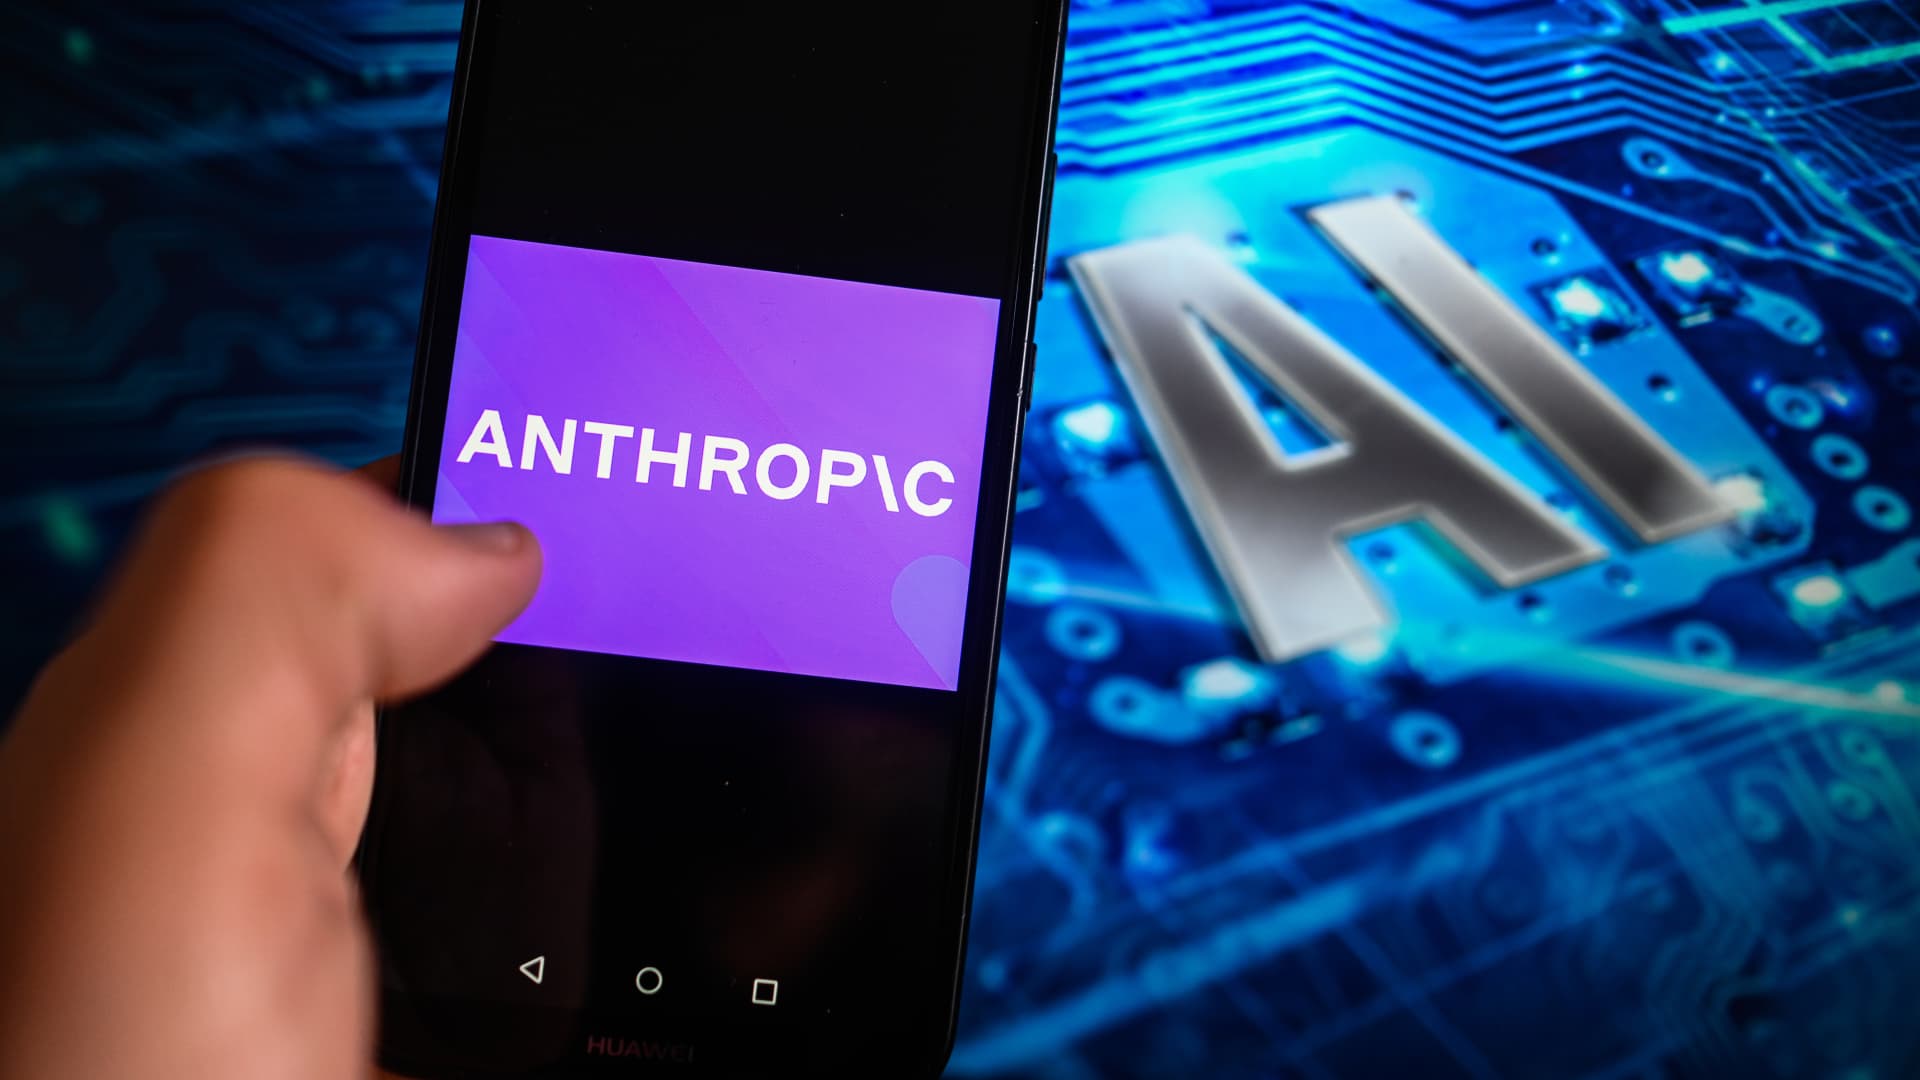 Anthropic iPhone AI app, business plan to compete with OpenAI announced [Video]